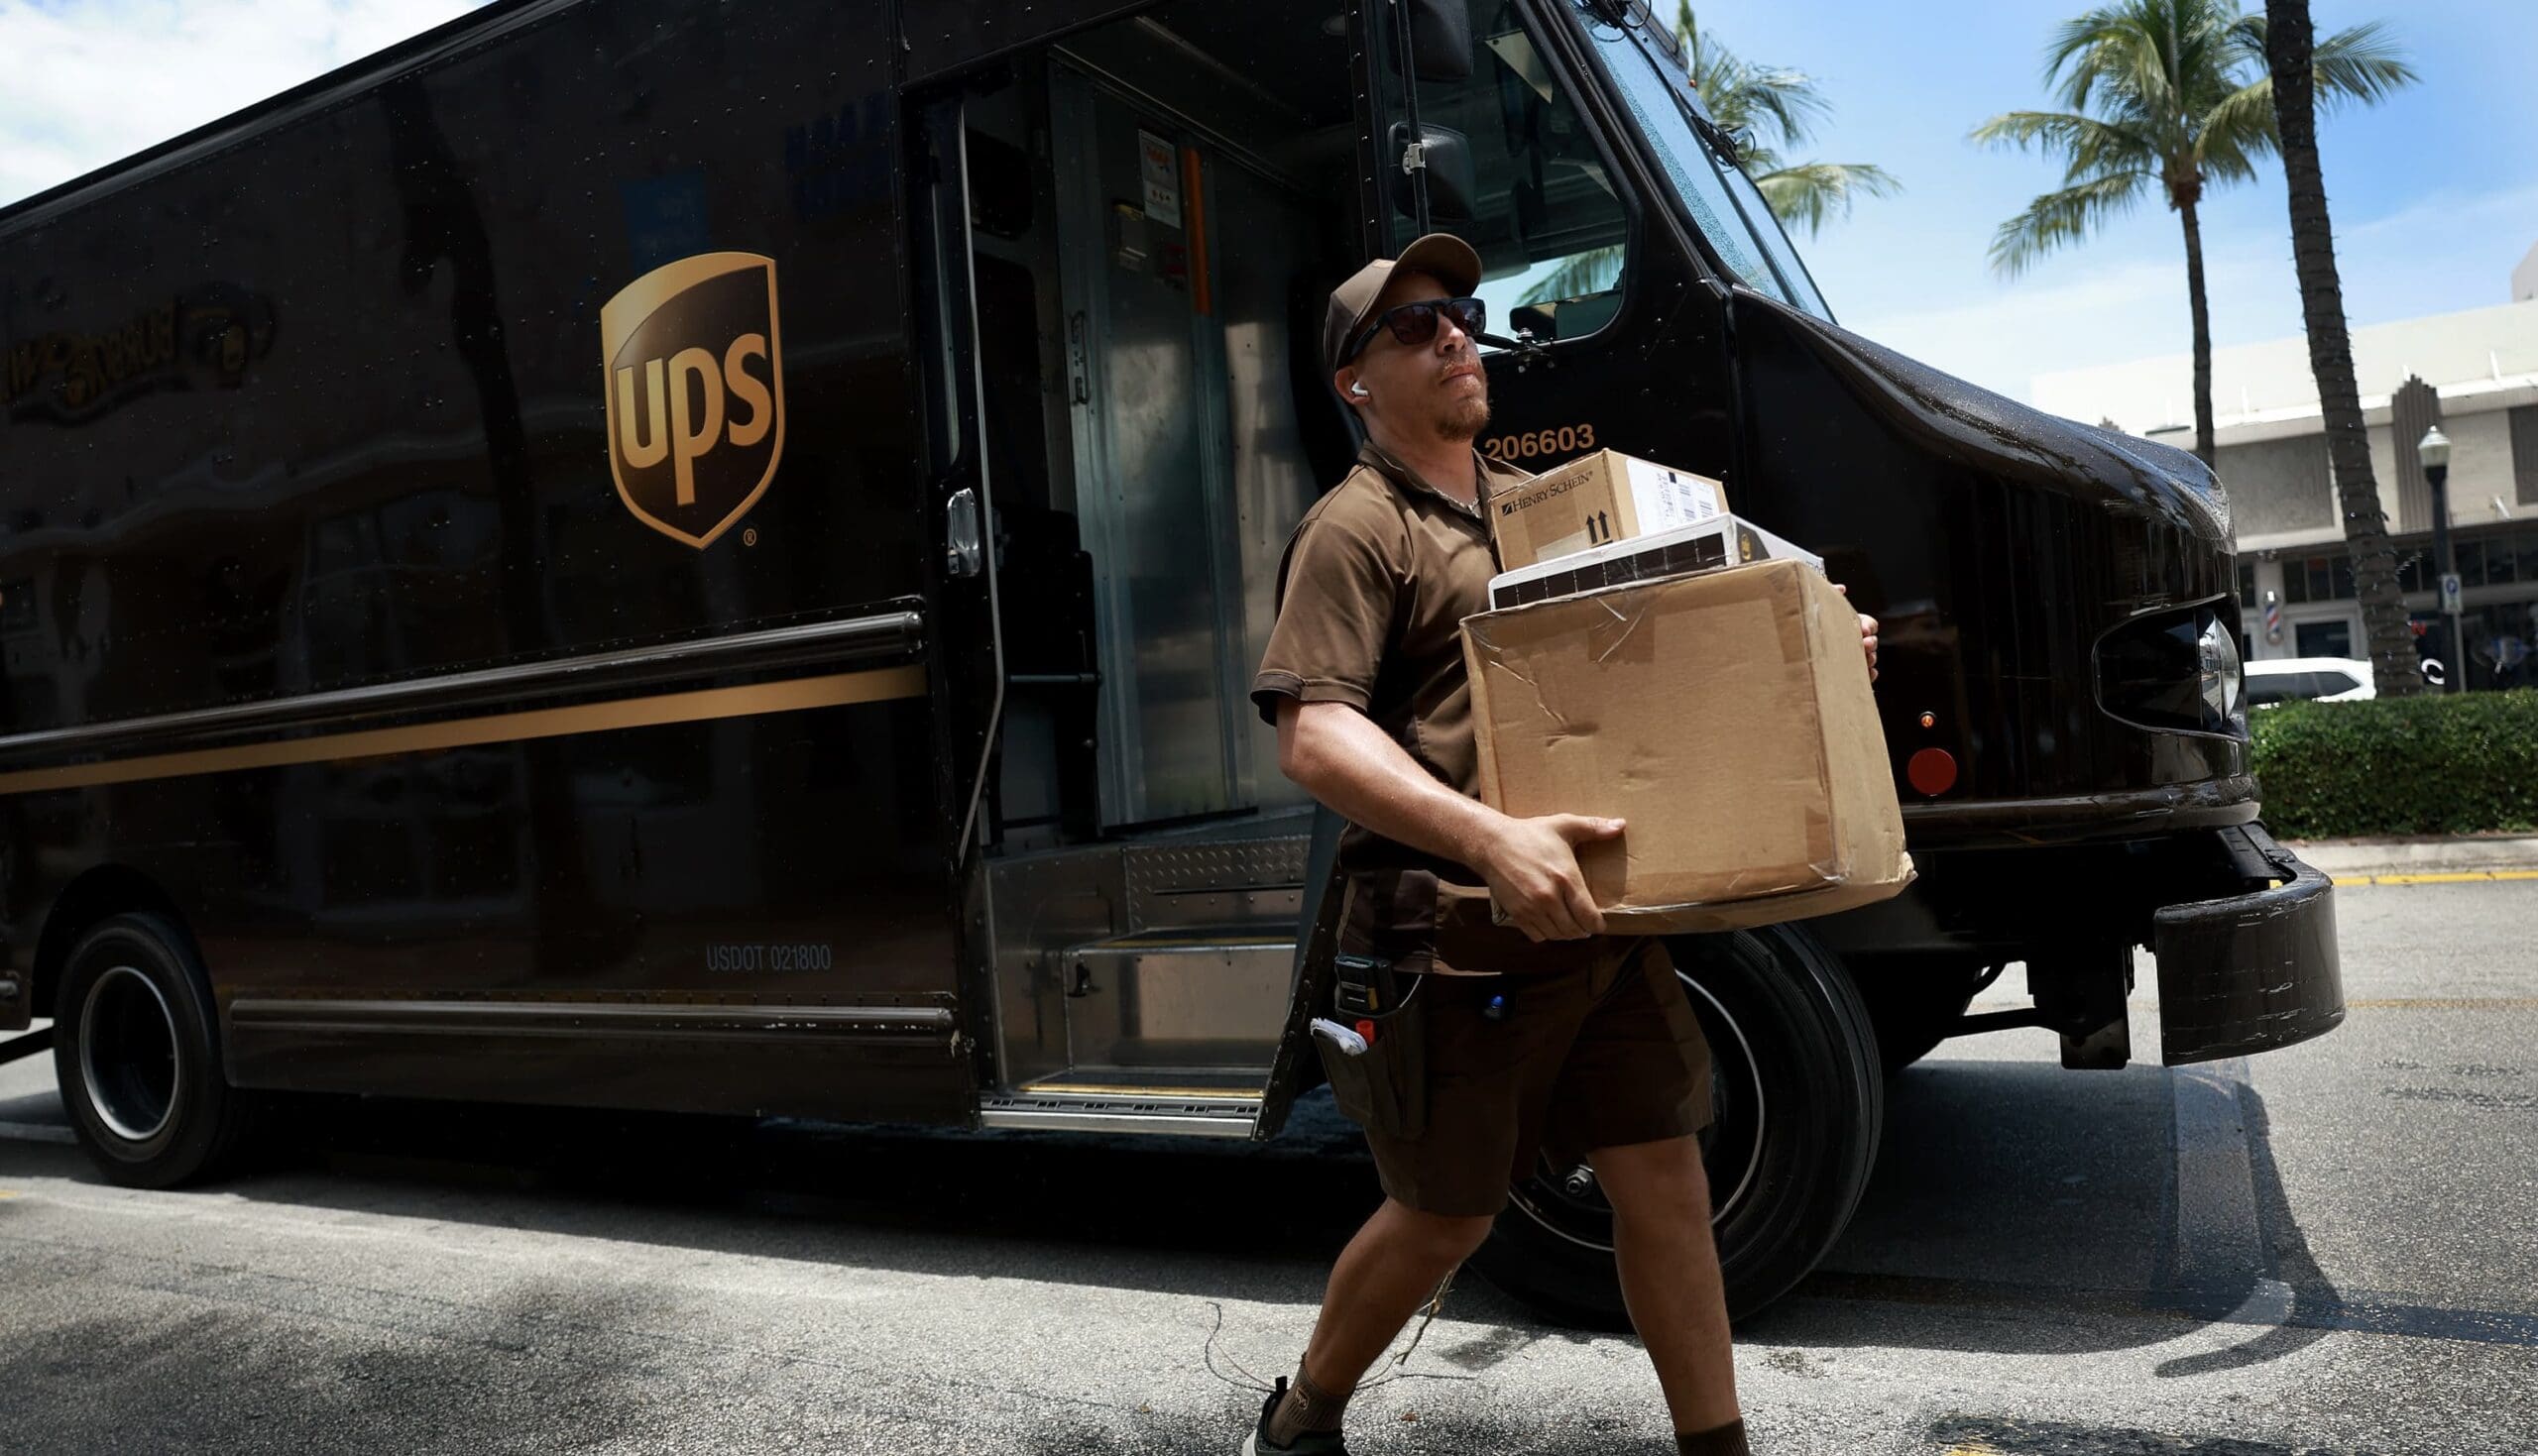 UPS to Cut 12,000 Jobs as Wages Rise and Package Volumes Fall